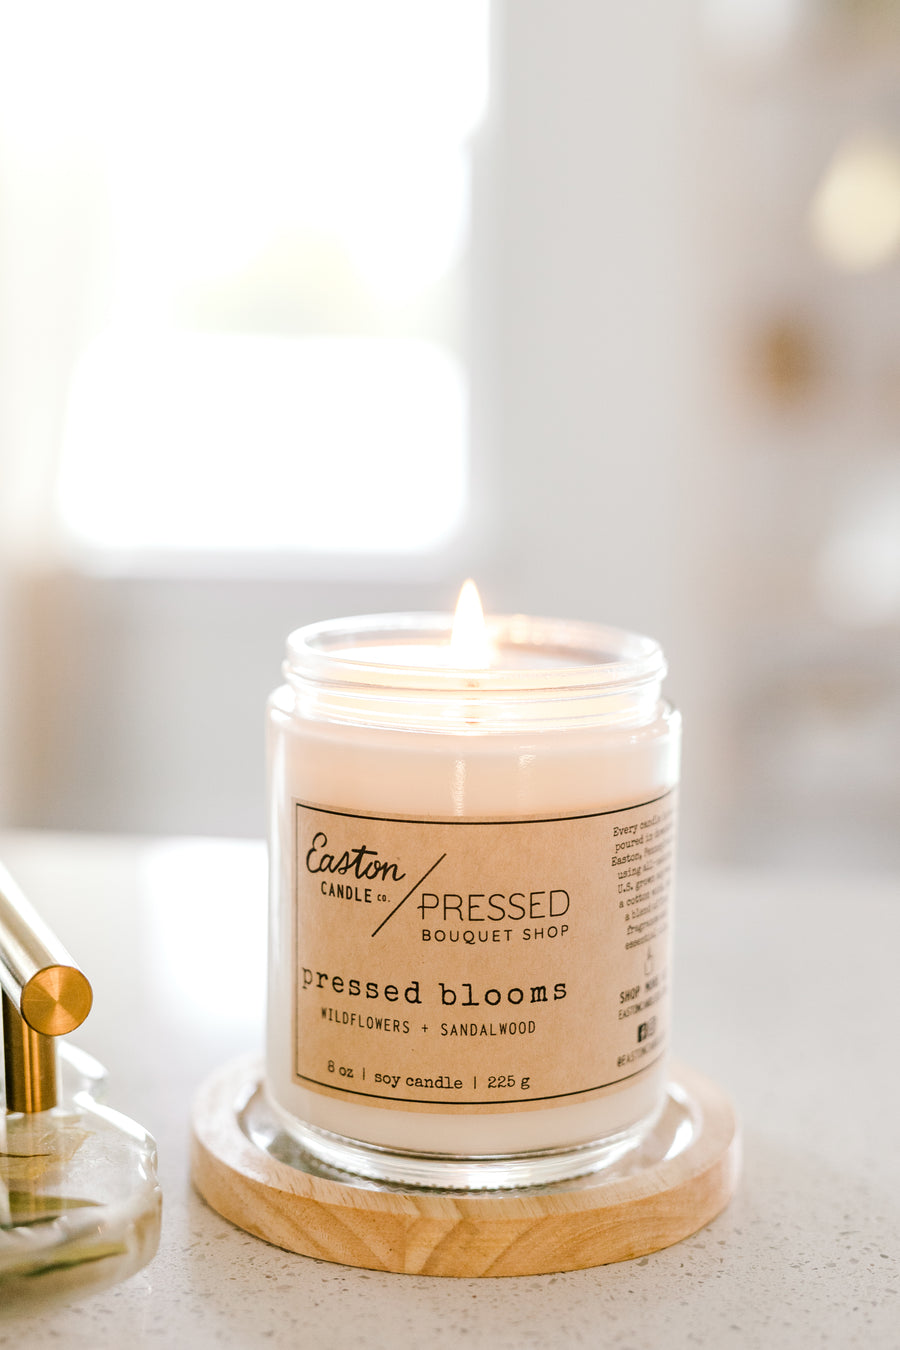 Pressed Blooms - Pressed Bouquet Shop candle